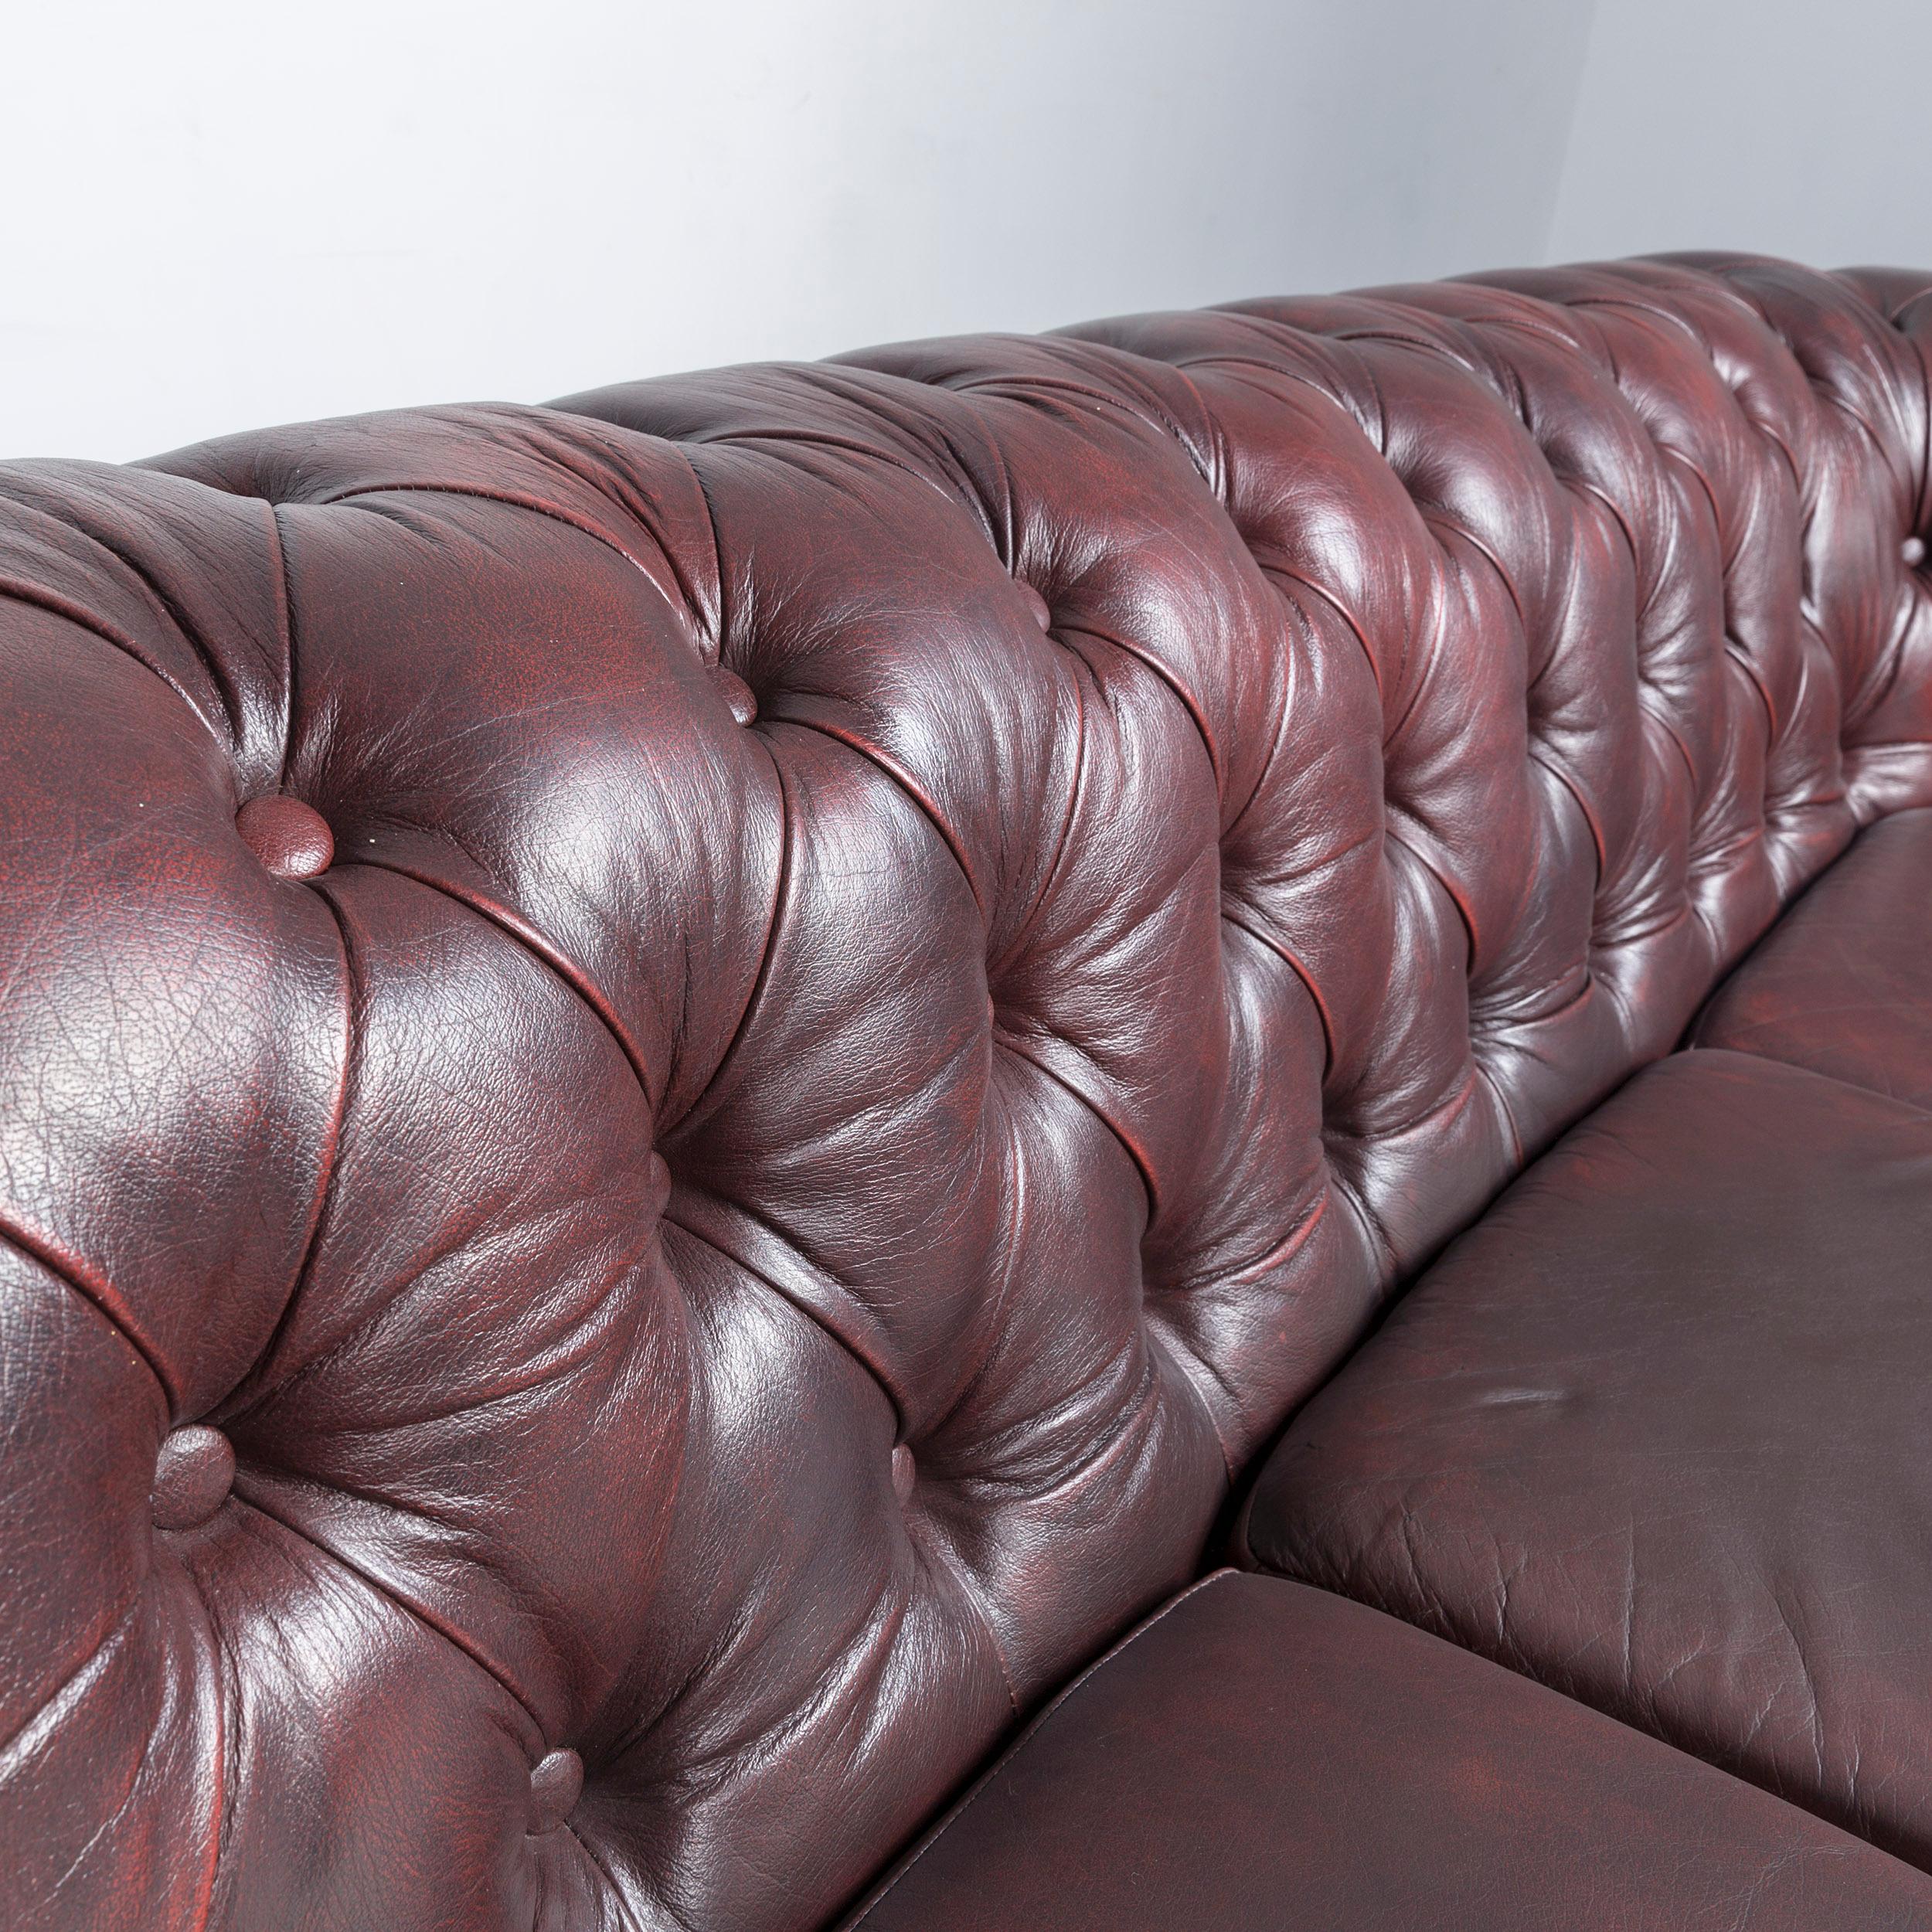 Chesterfield Leather Sofa Brown Three-Seat Couch Vintage Retro 2